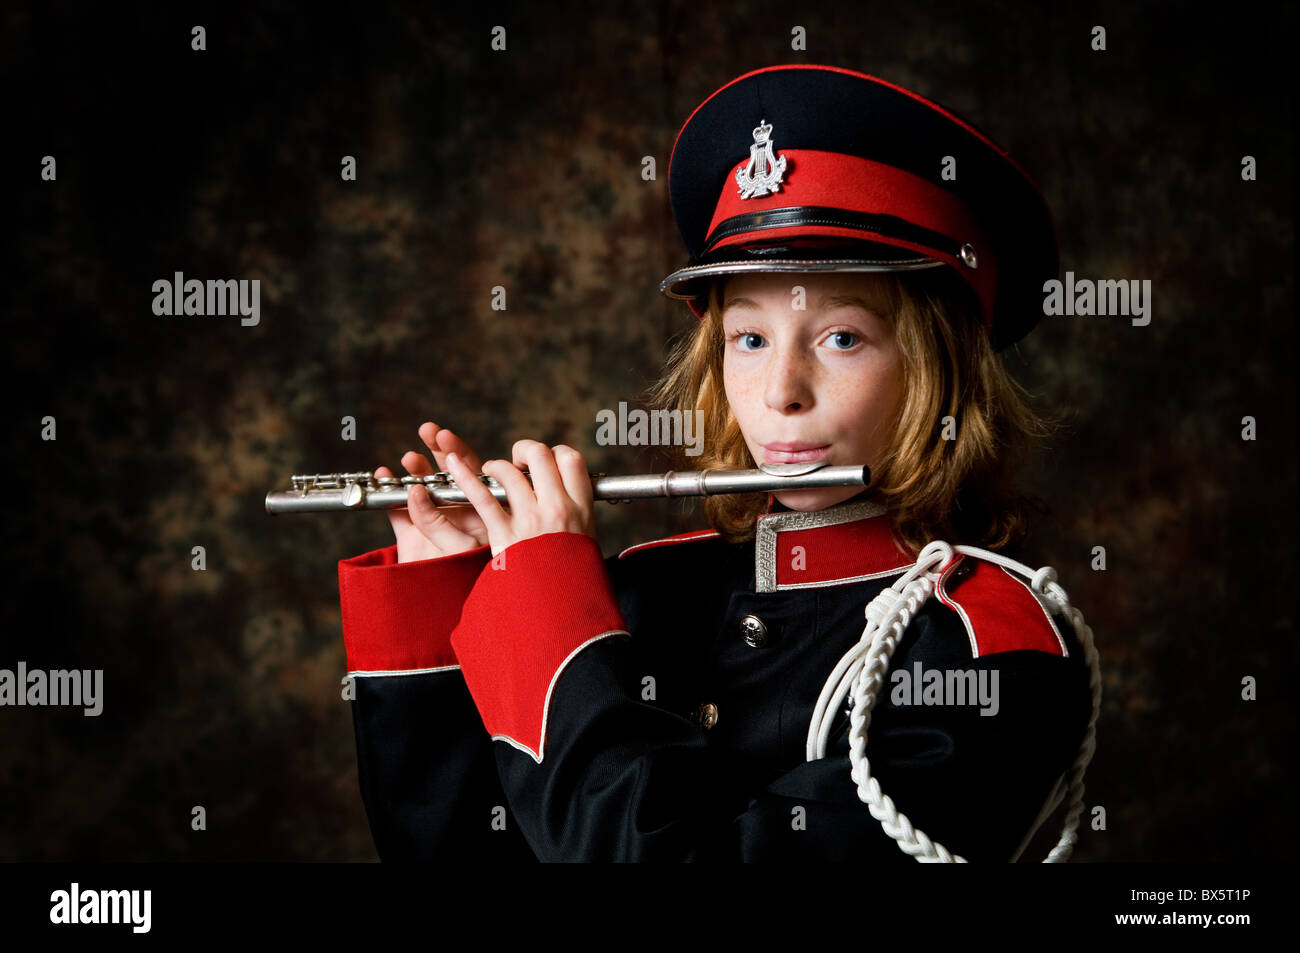 girl in a band uniform playing a flute Stock Photo